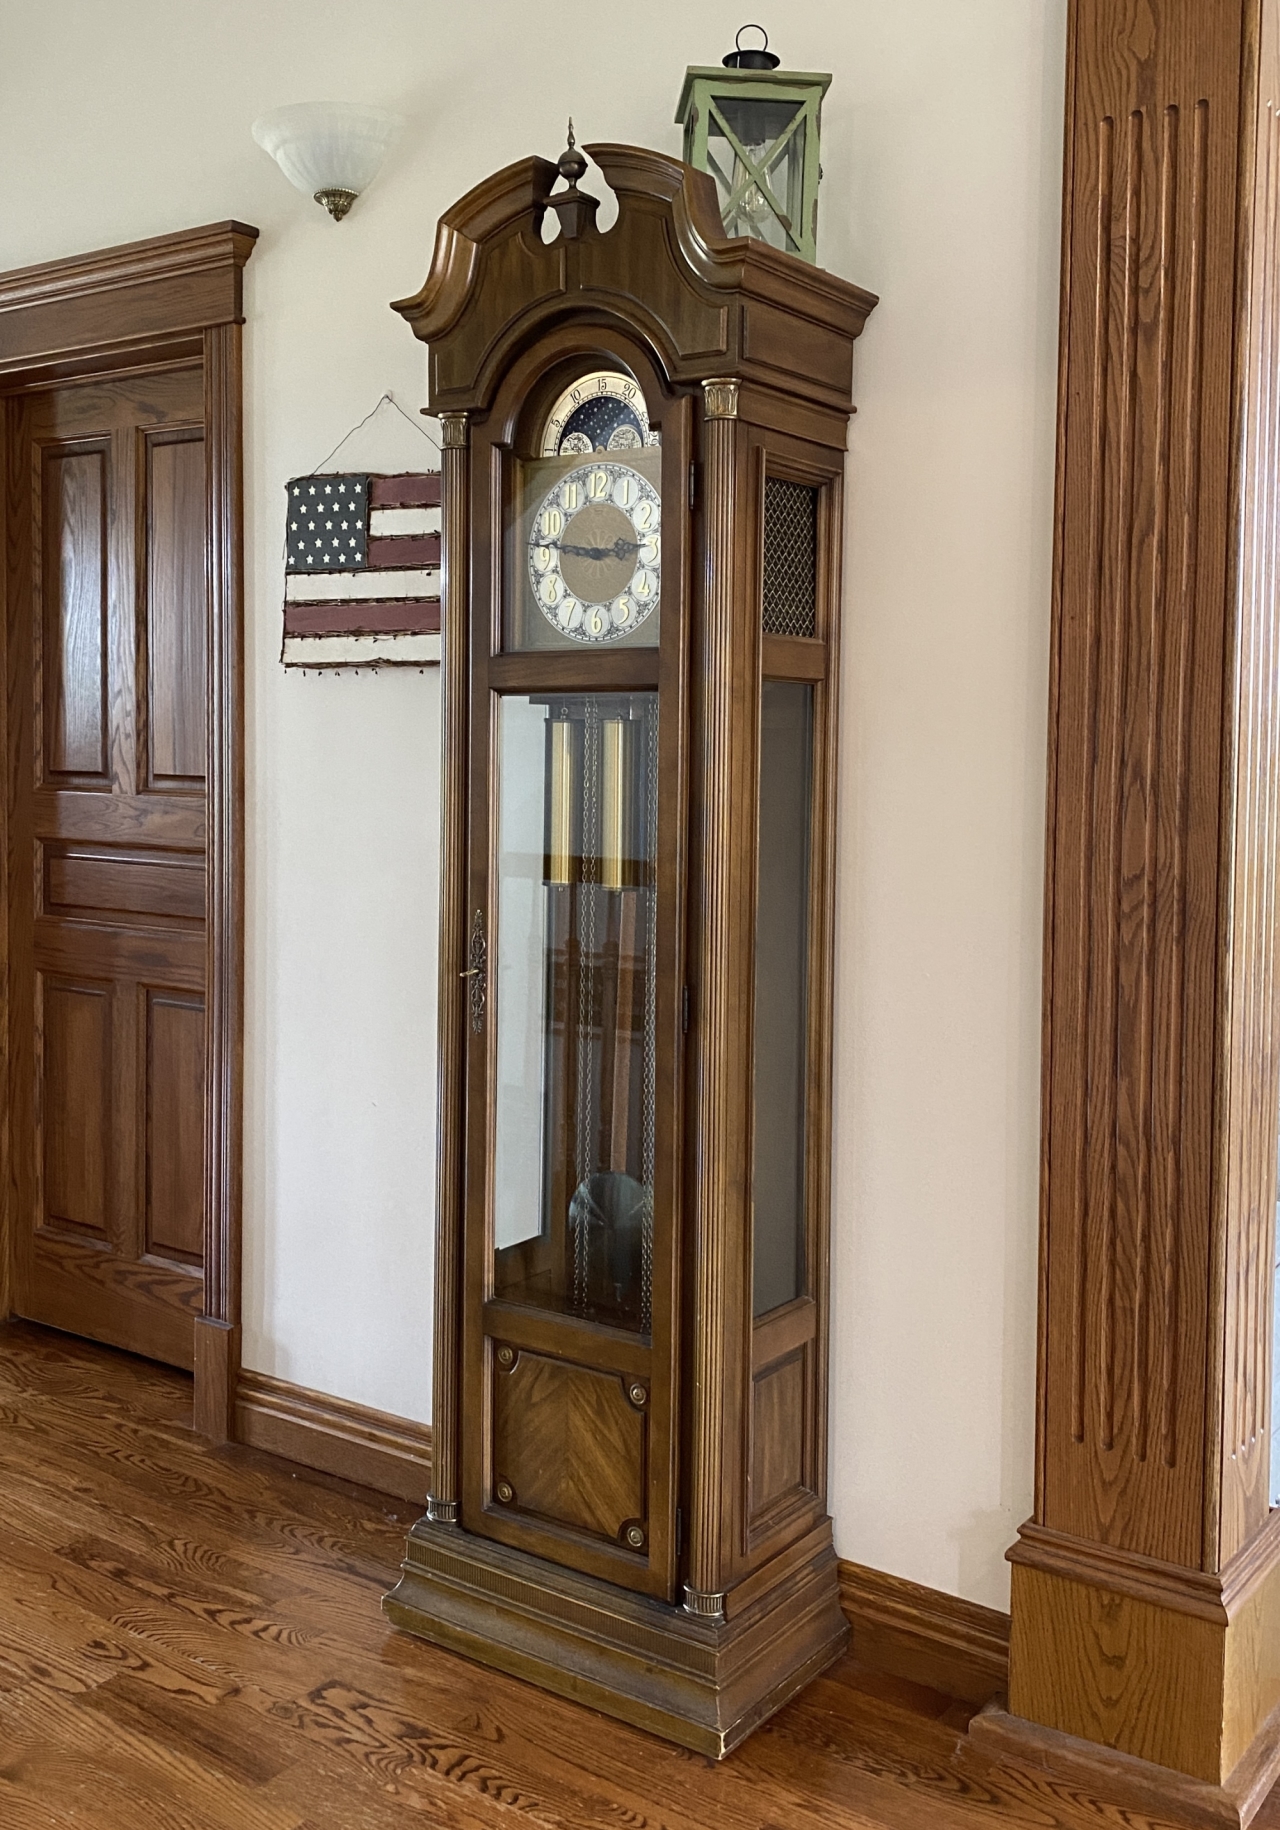 How to move grandfather clock Cube Moving guide